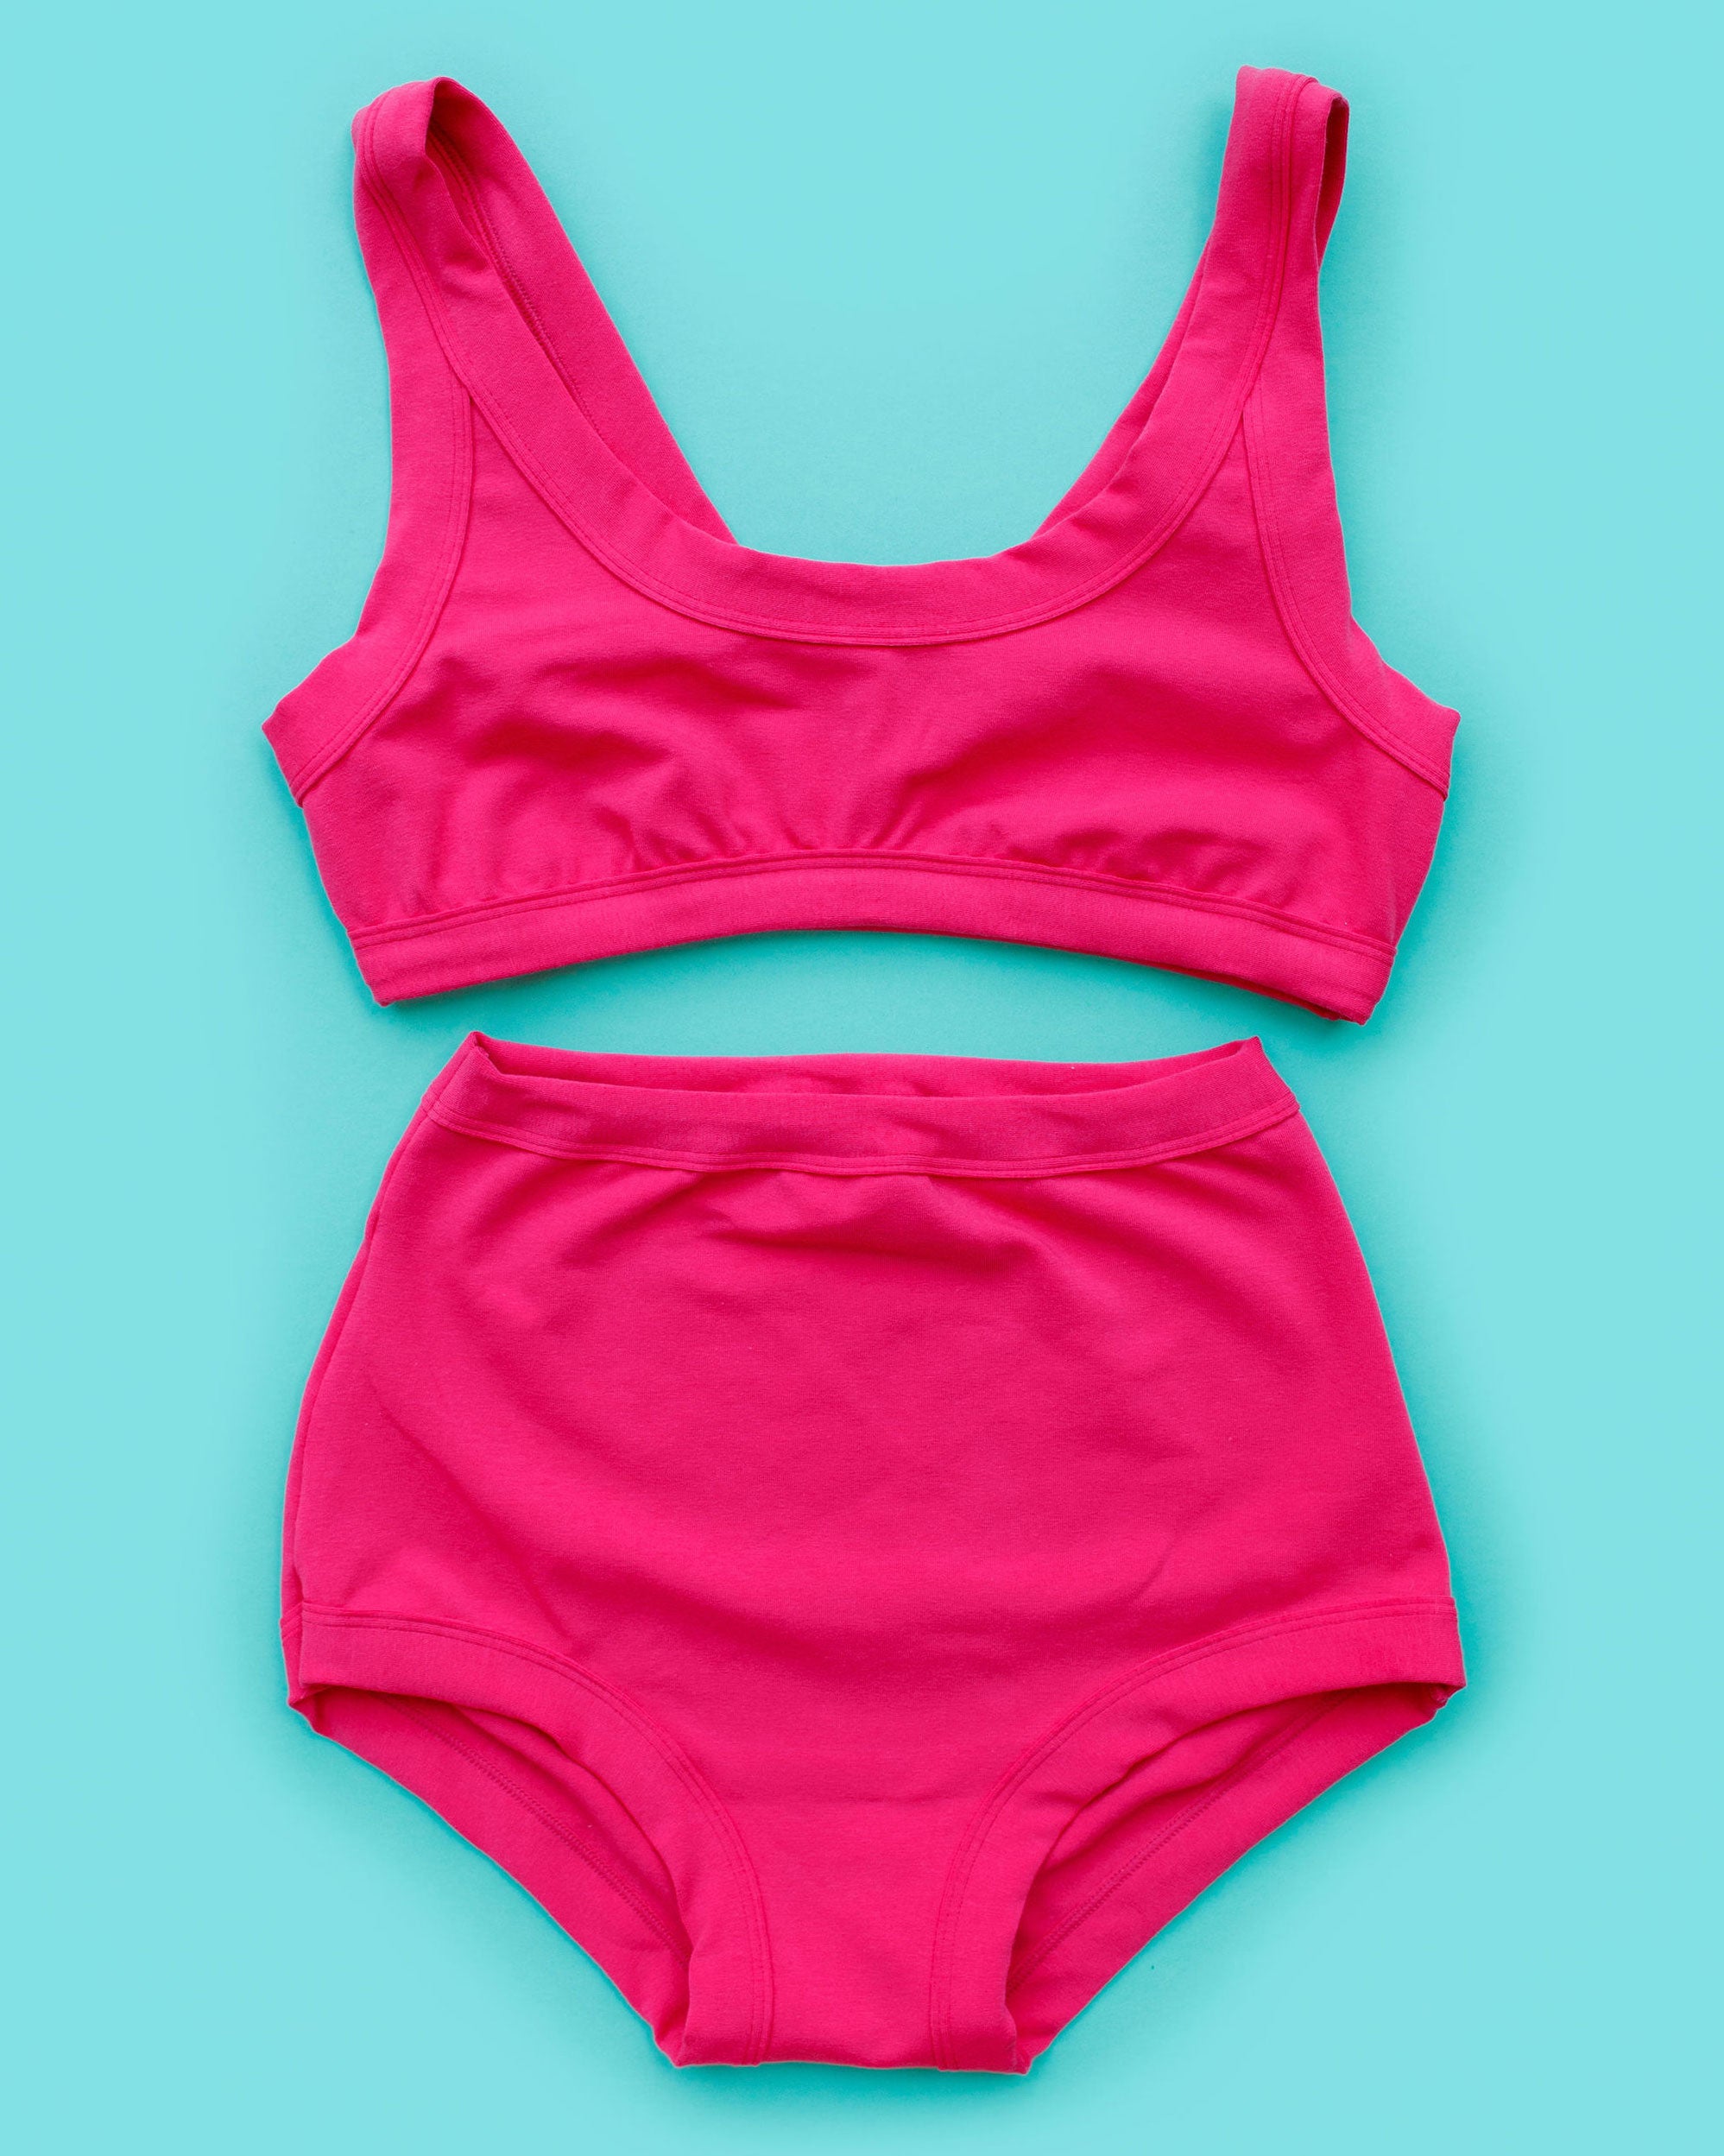 Flay lay of Thunderpants Bralette and Sky Rise underwear in a hot pink color.